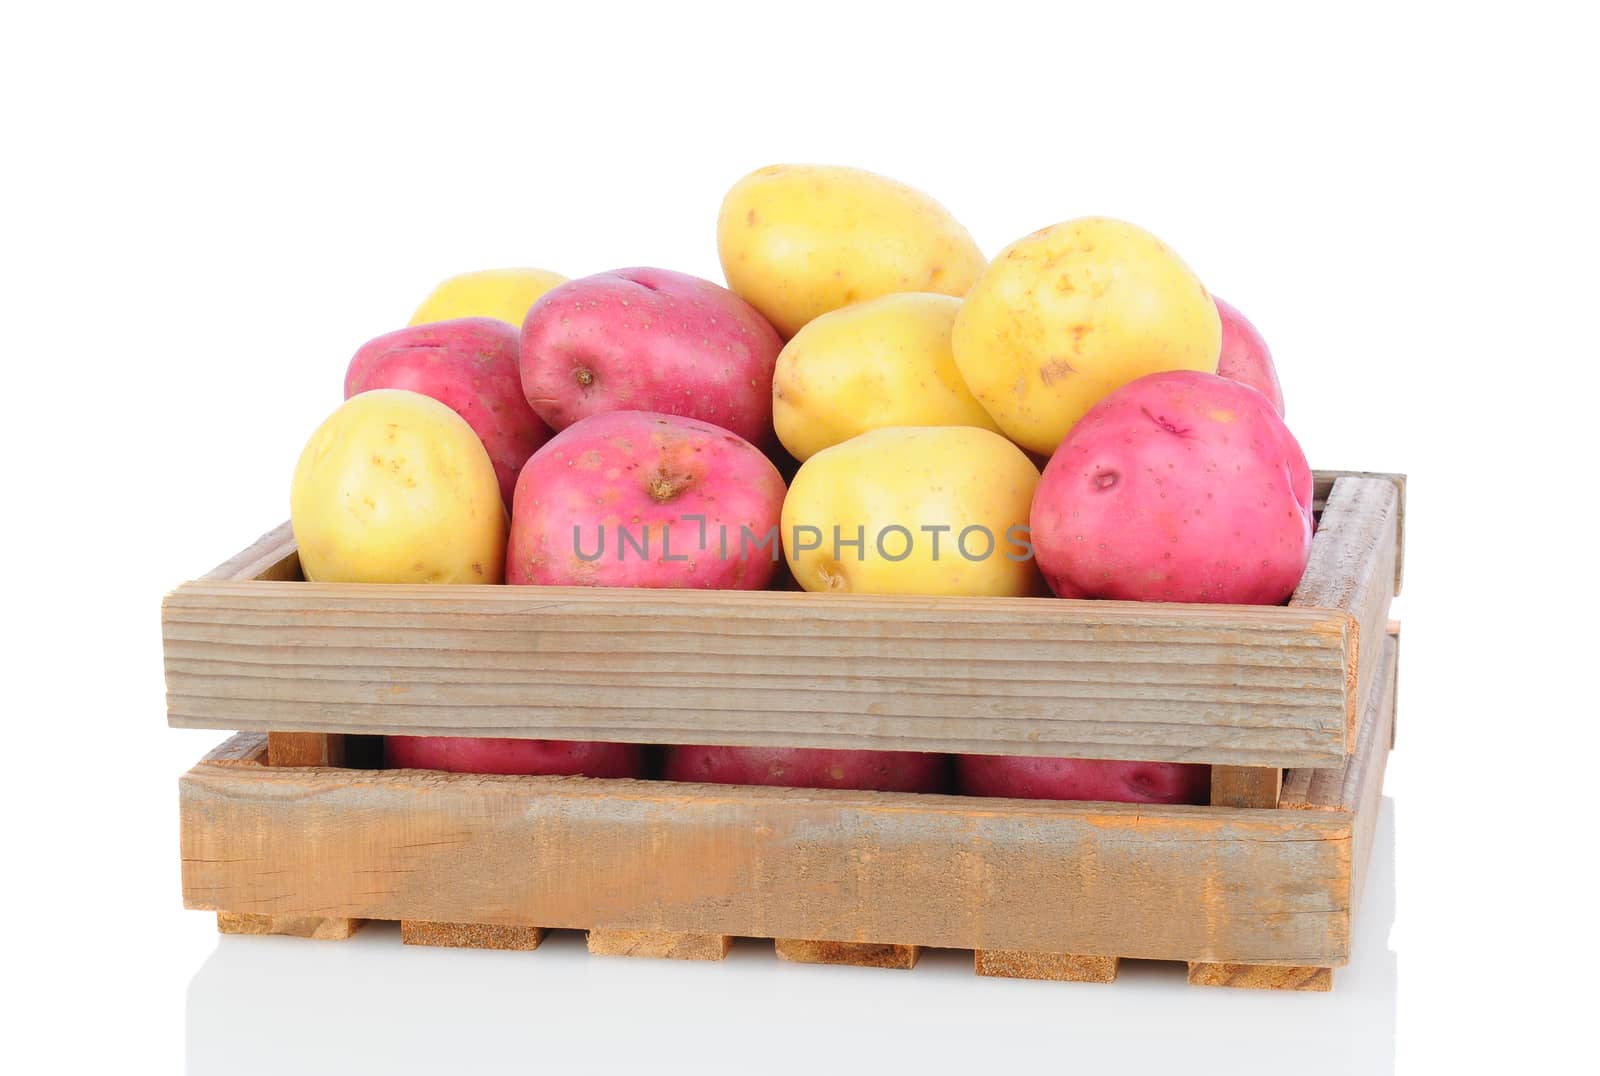 Red and White Potatoes in Wooden Crate by sCukrov